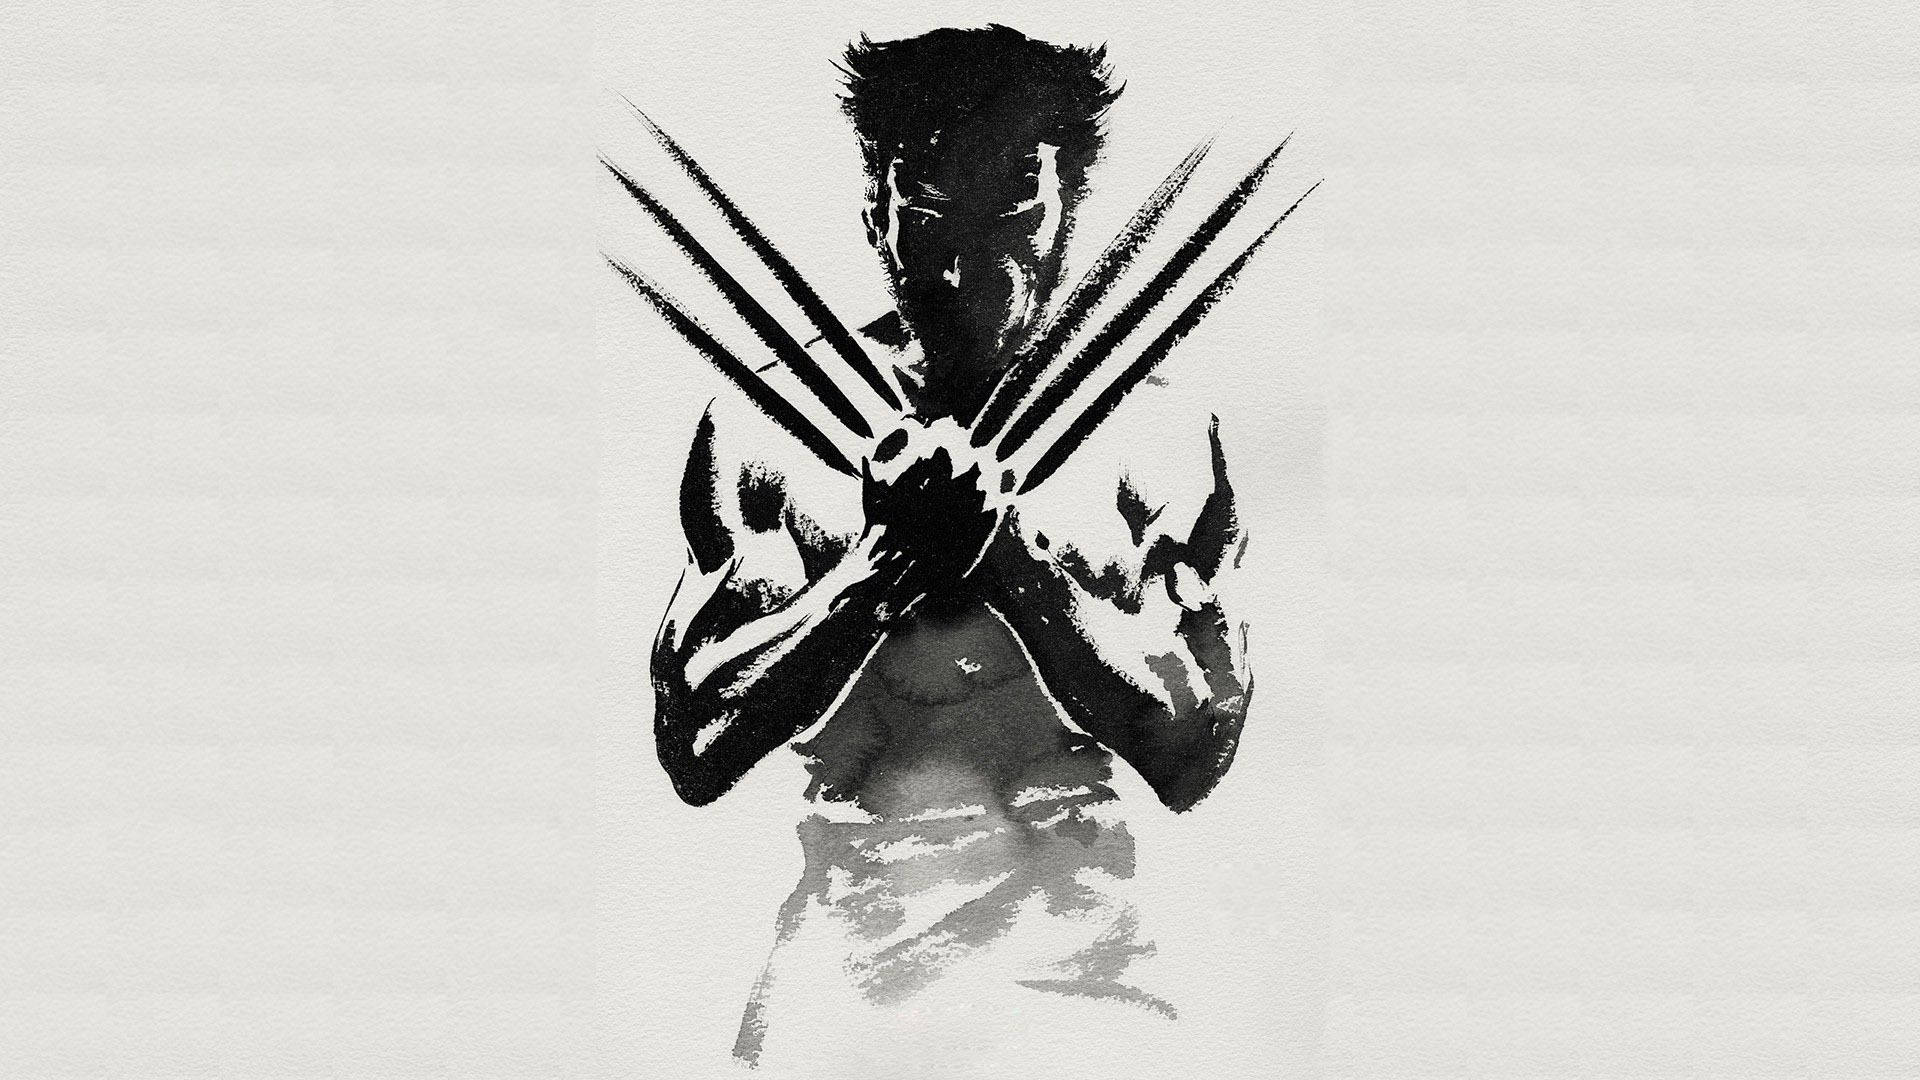 Gritty and Determined – The Wolverine Wallpaper